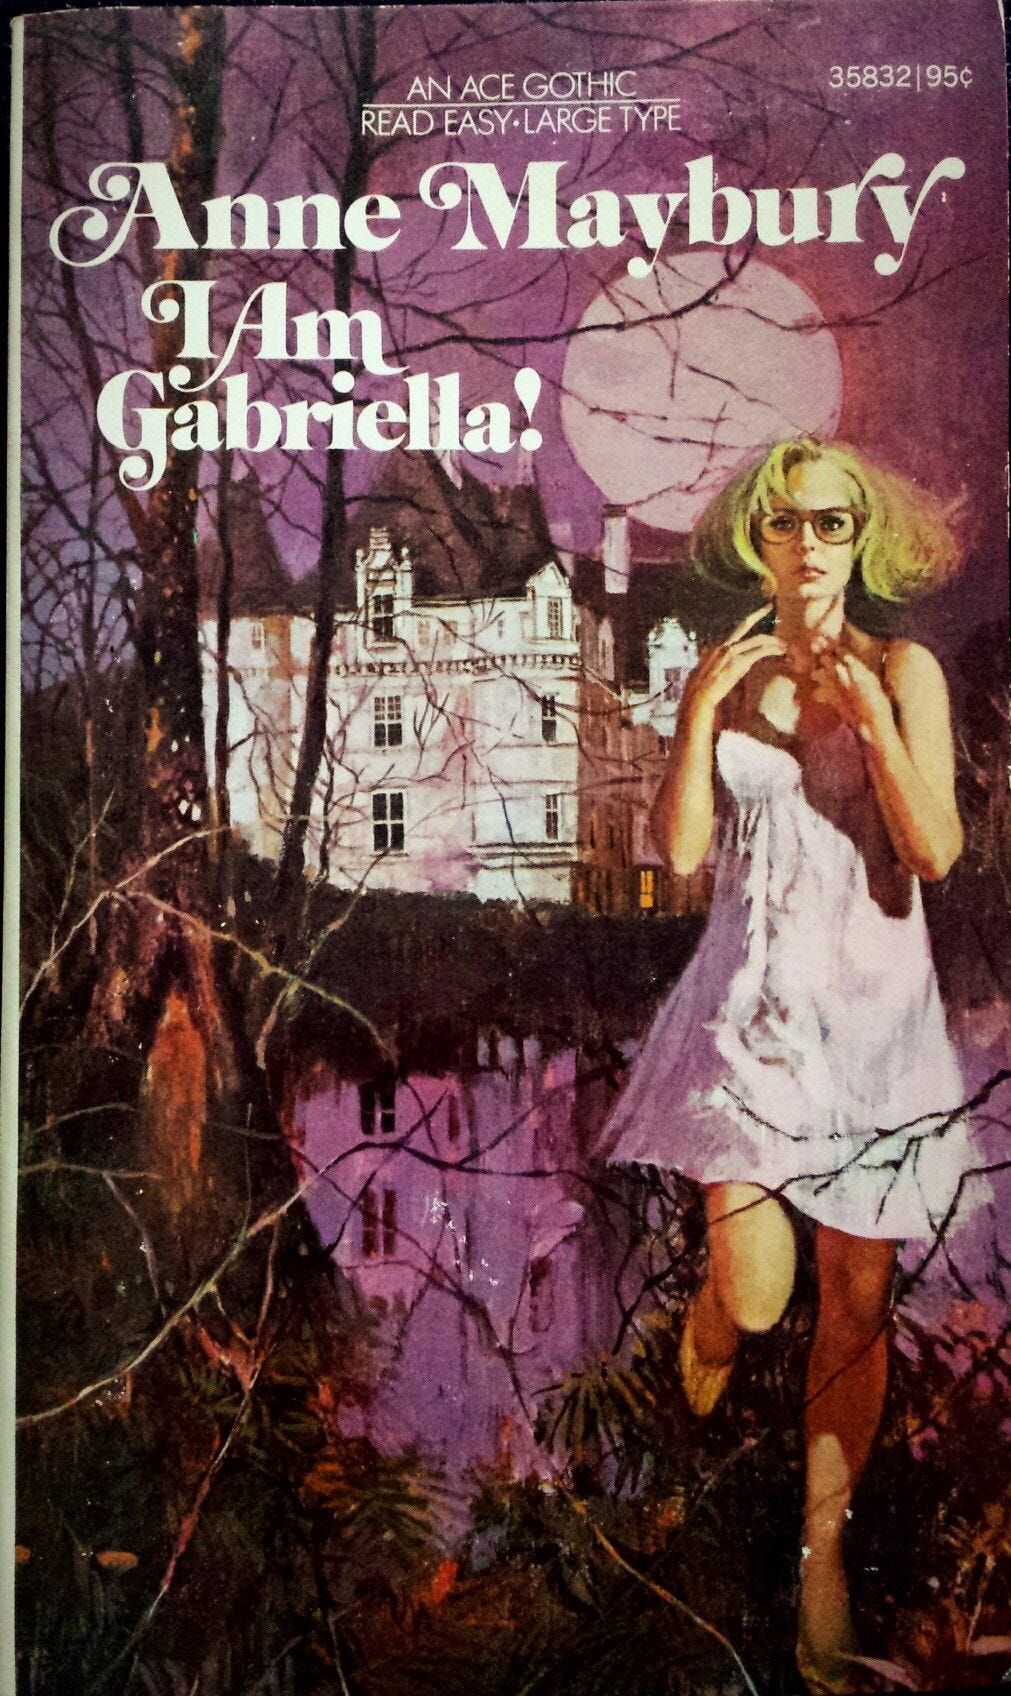 I am Gabriella by Anne Maybury. 1960s gothic aesthetic - a blonde white woman with a bored expression, glasses, and a small flowy peignoir flees from an imposing white House.